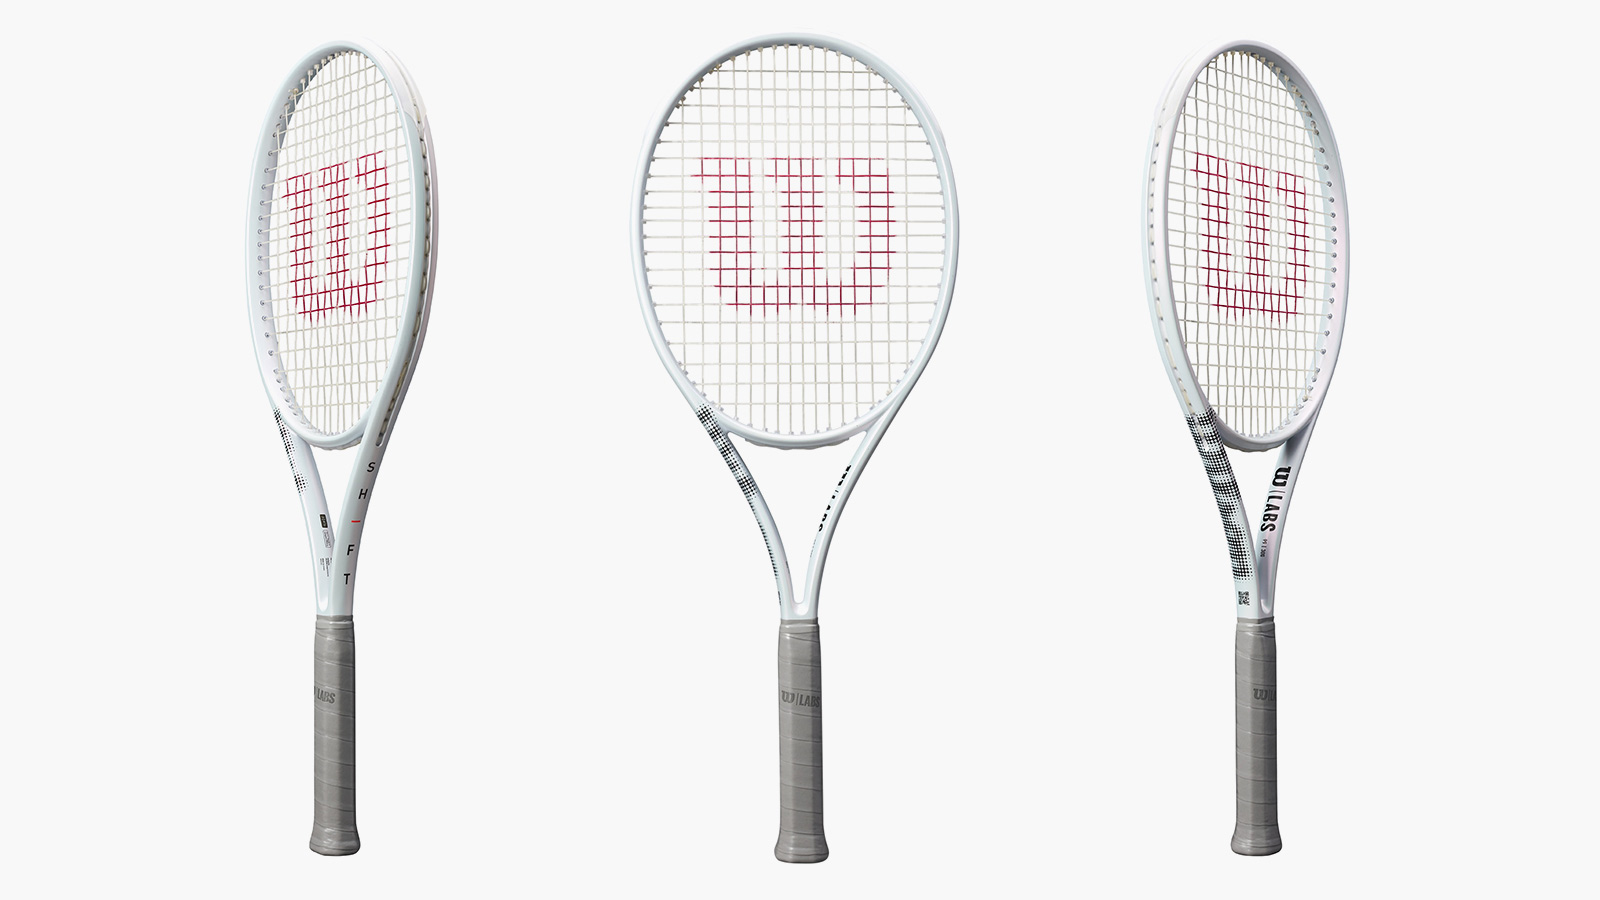 Wilson Wlabs Shift 99/300 Tennis Racket Sets New Limits For Spin 